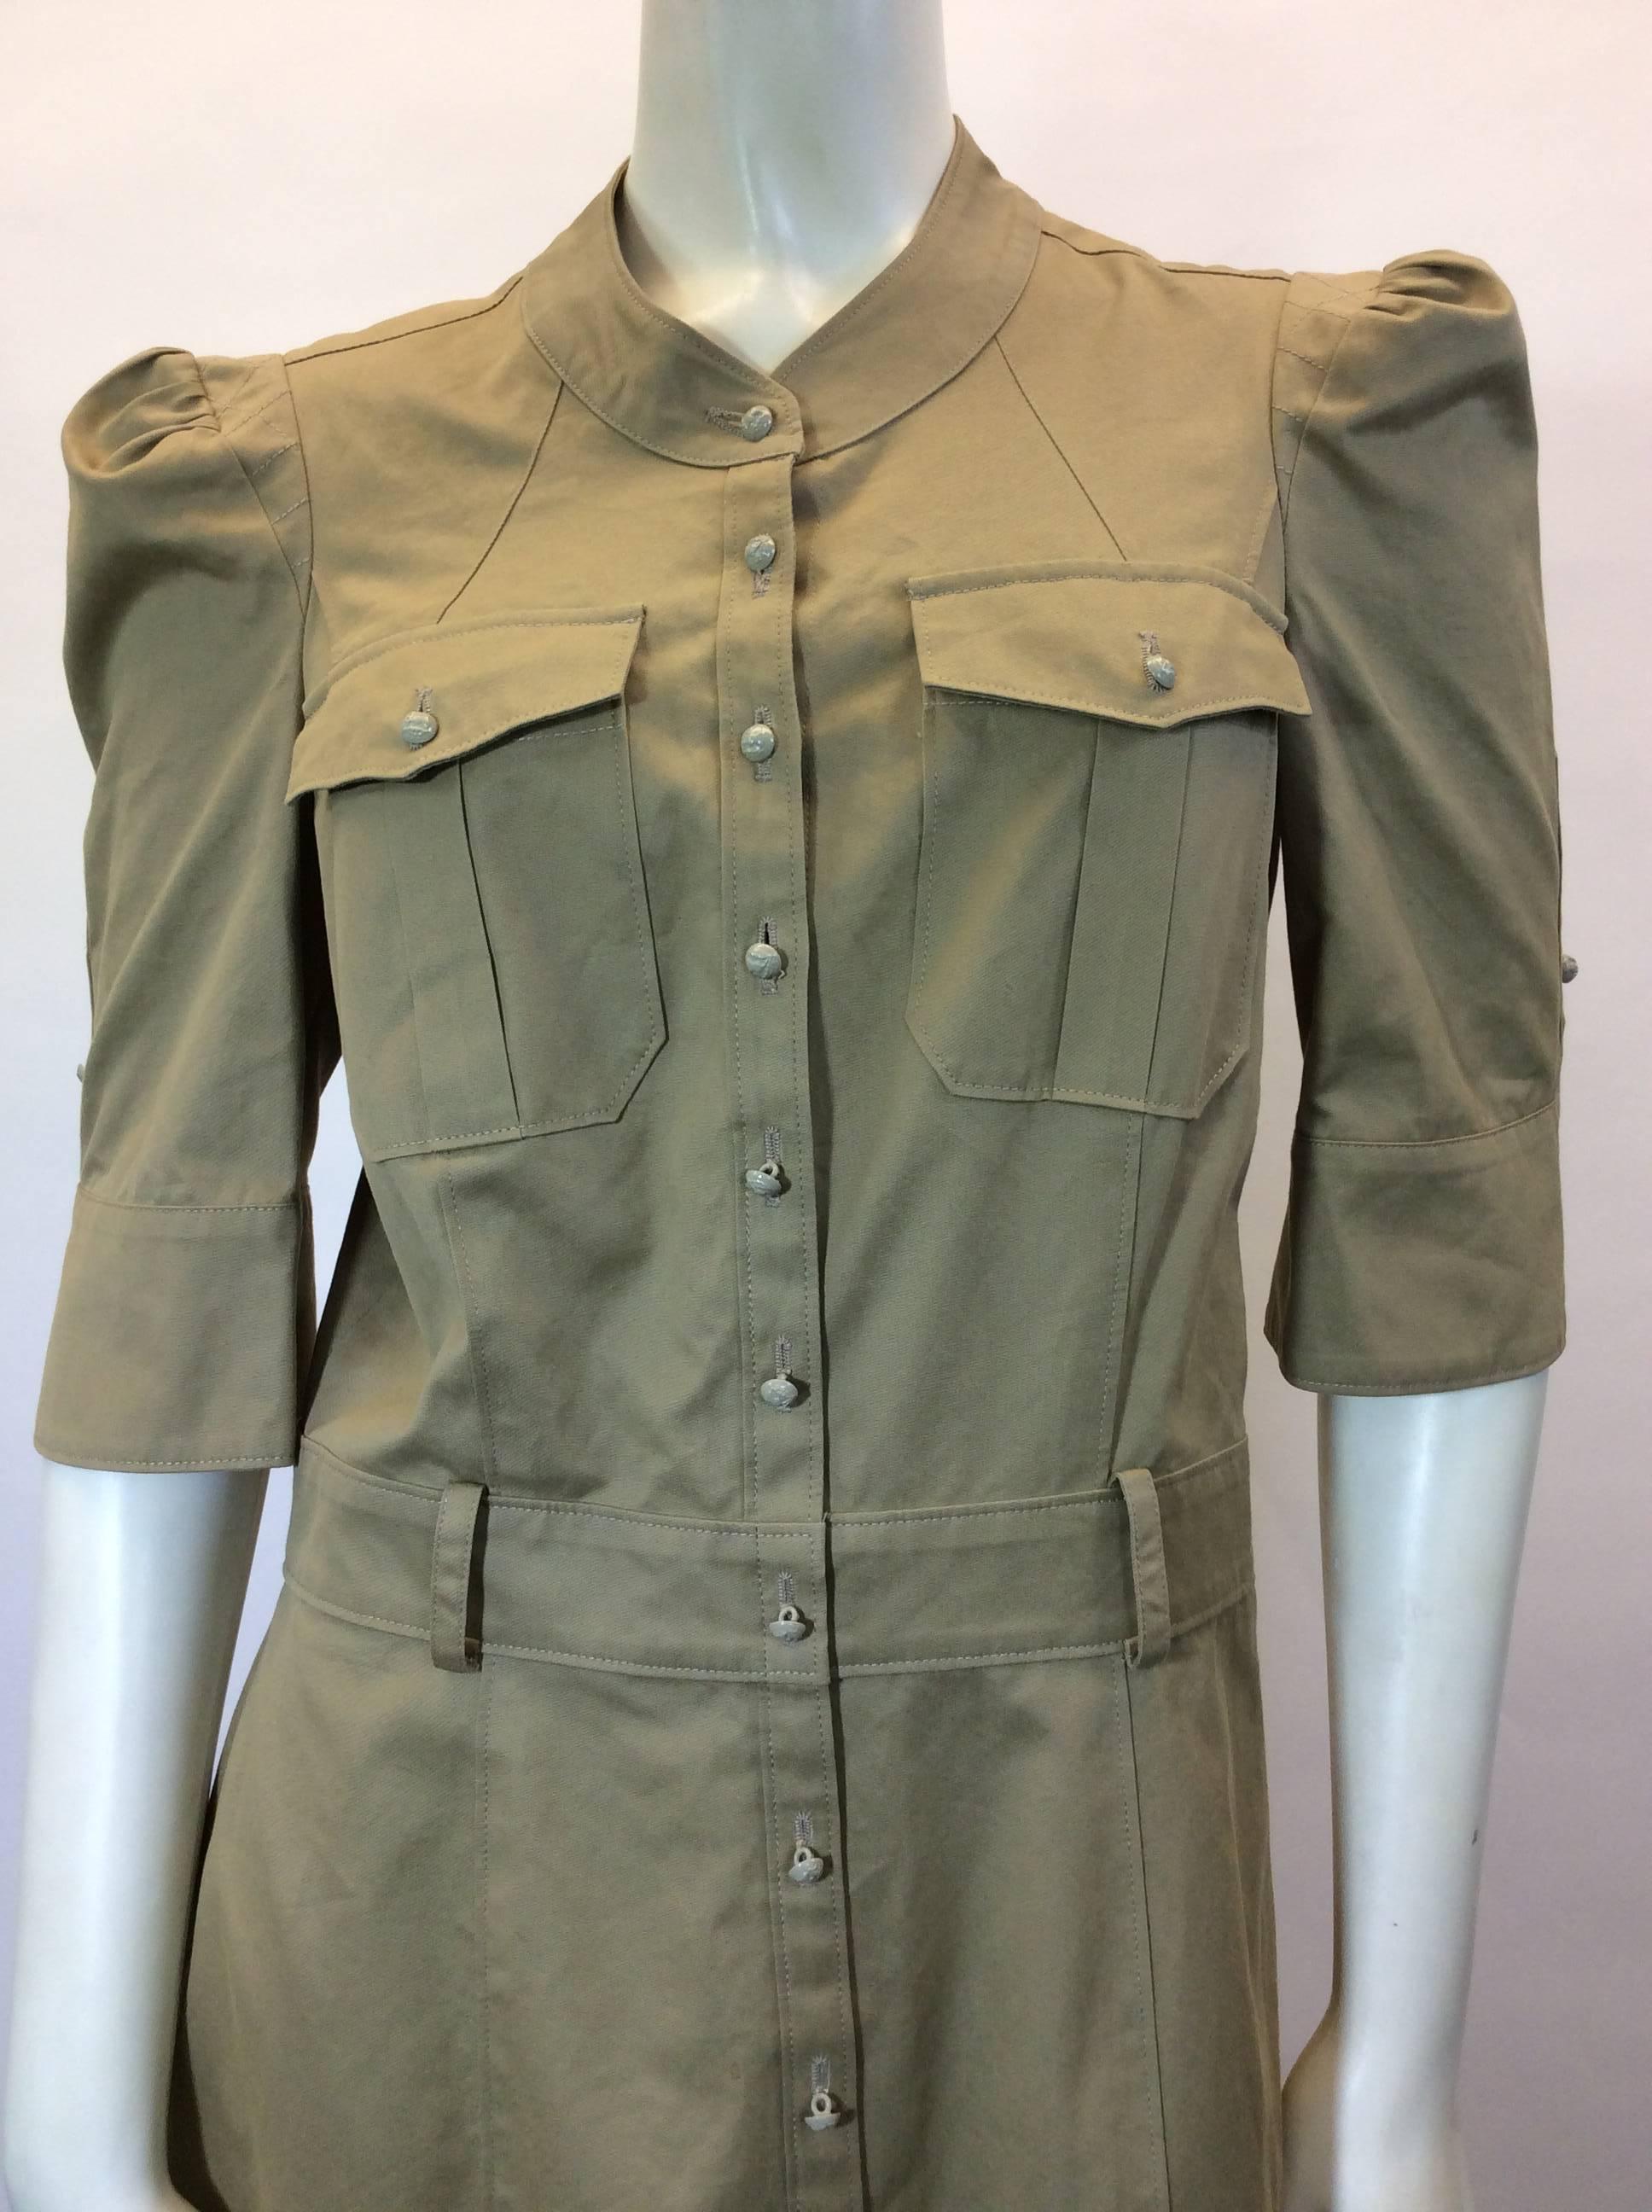 Balenciaga Buttondown Dress
Size Medium/ Size 40 
Two pockets on chest 
Tan small buttons 
Made in Italy 